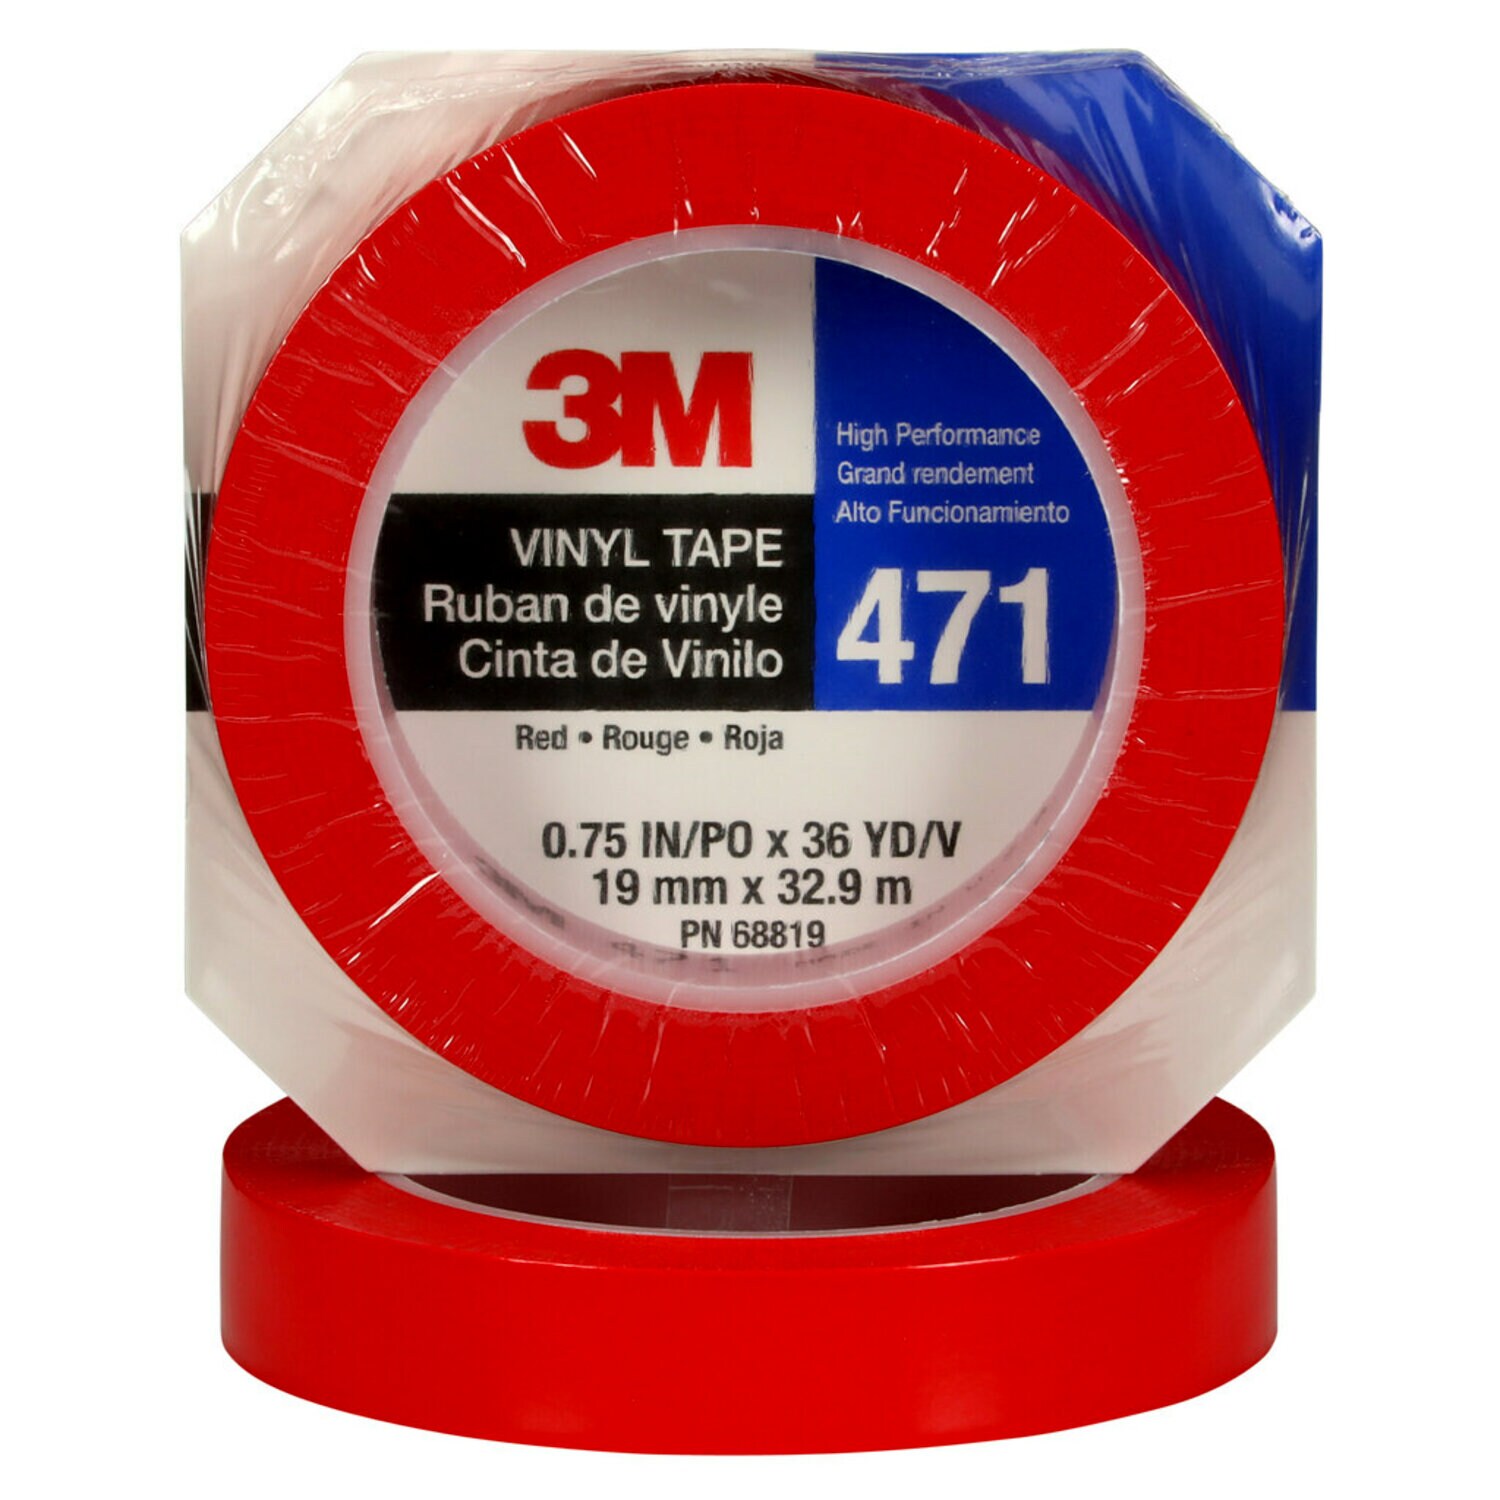 7100044624 - 3M Vinyl Tape 471, Red, 3/4 in x 36 yd, 5.2 mil, 48 rolls per case,
Individually Wrapped Conveniently Packaged